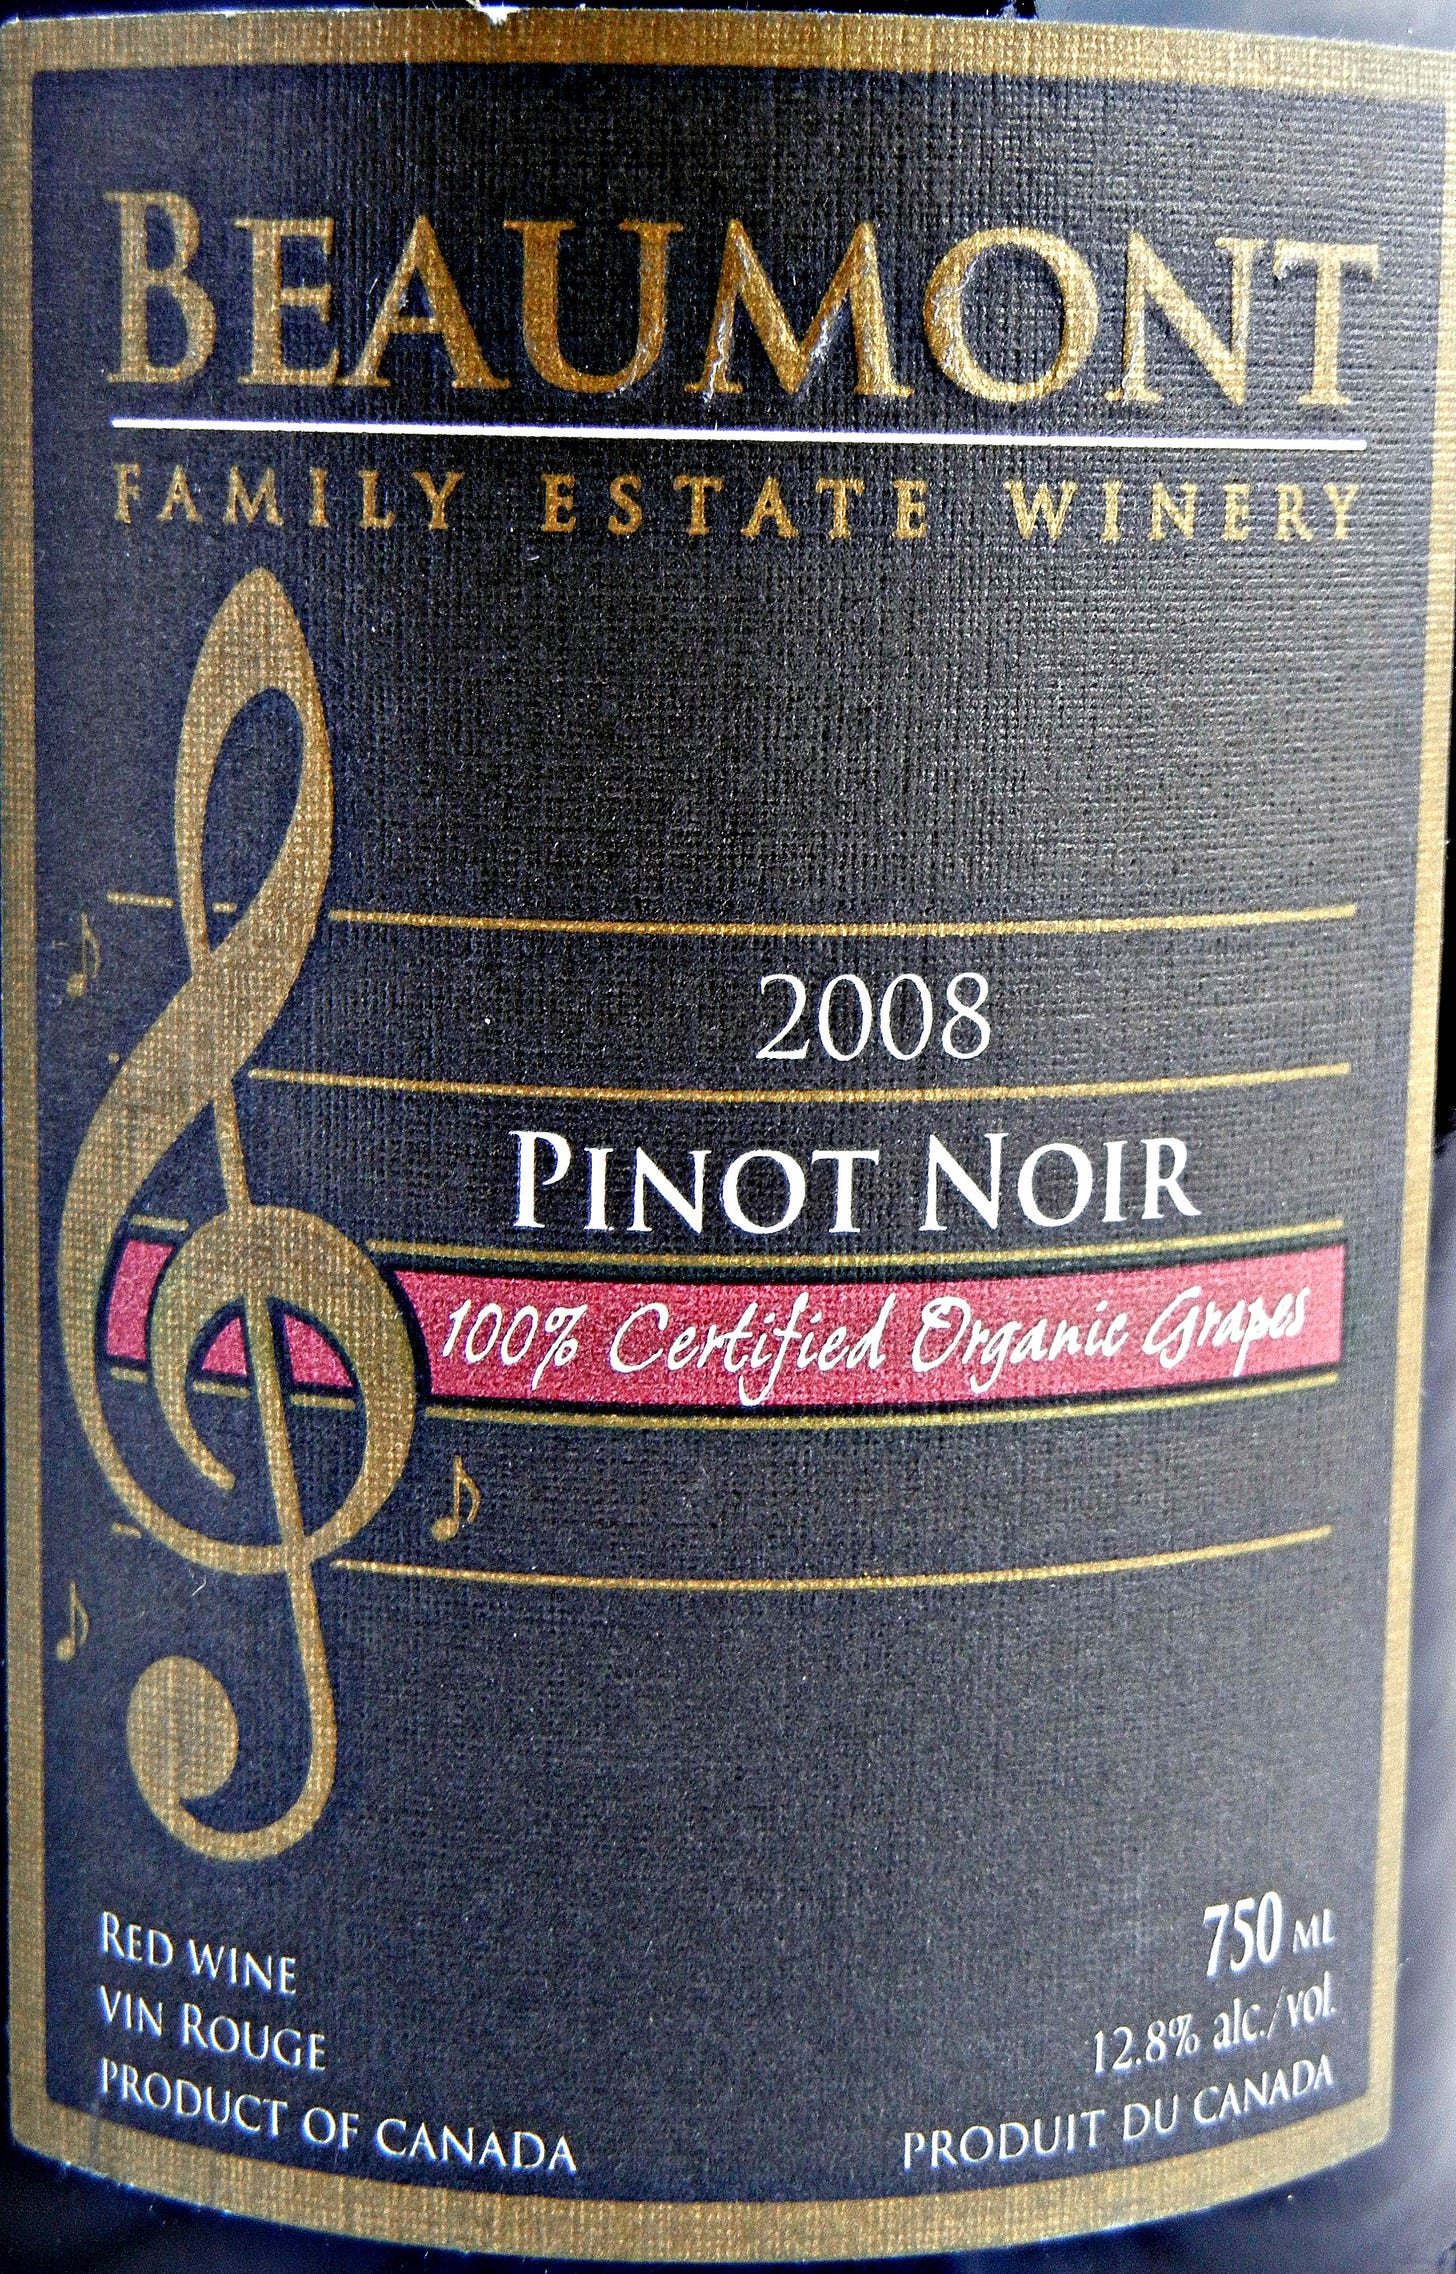 Beaumont Pinot Noir 2008 Label - BC Pinot Noir Tasting Review 23 